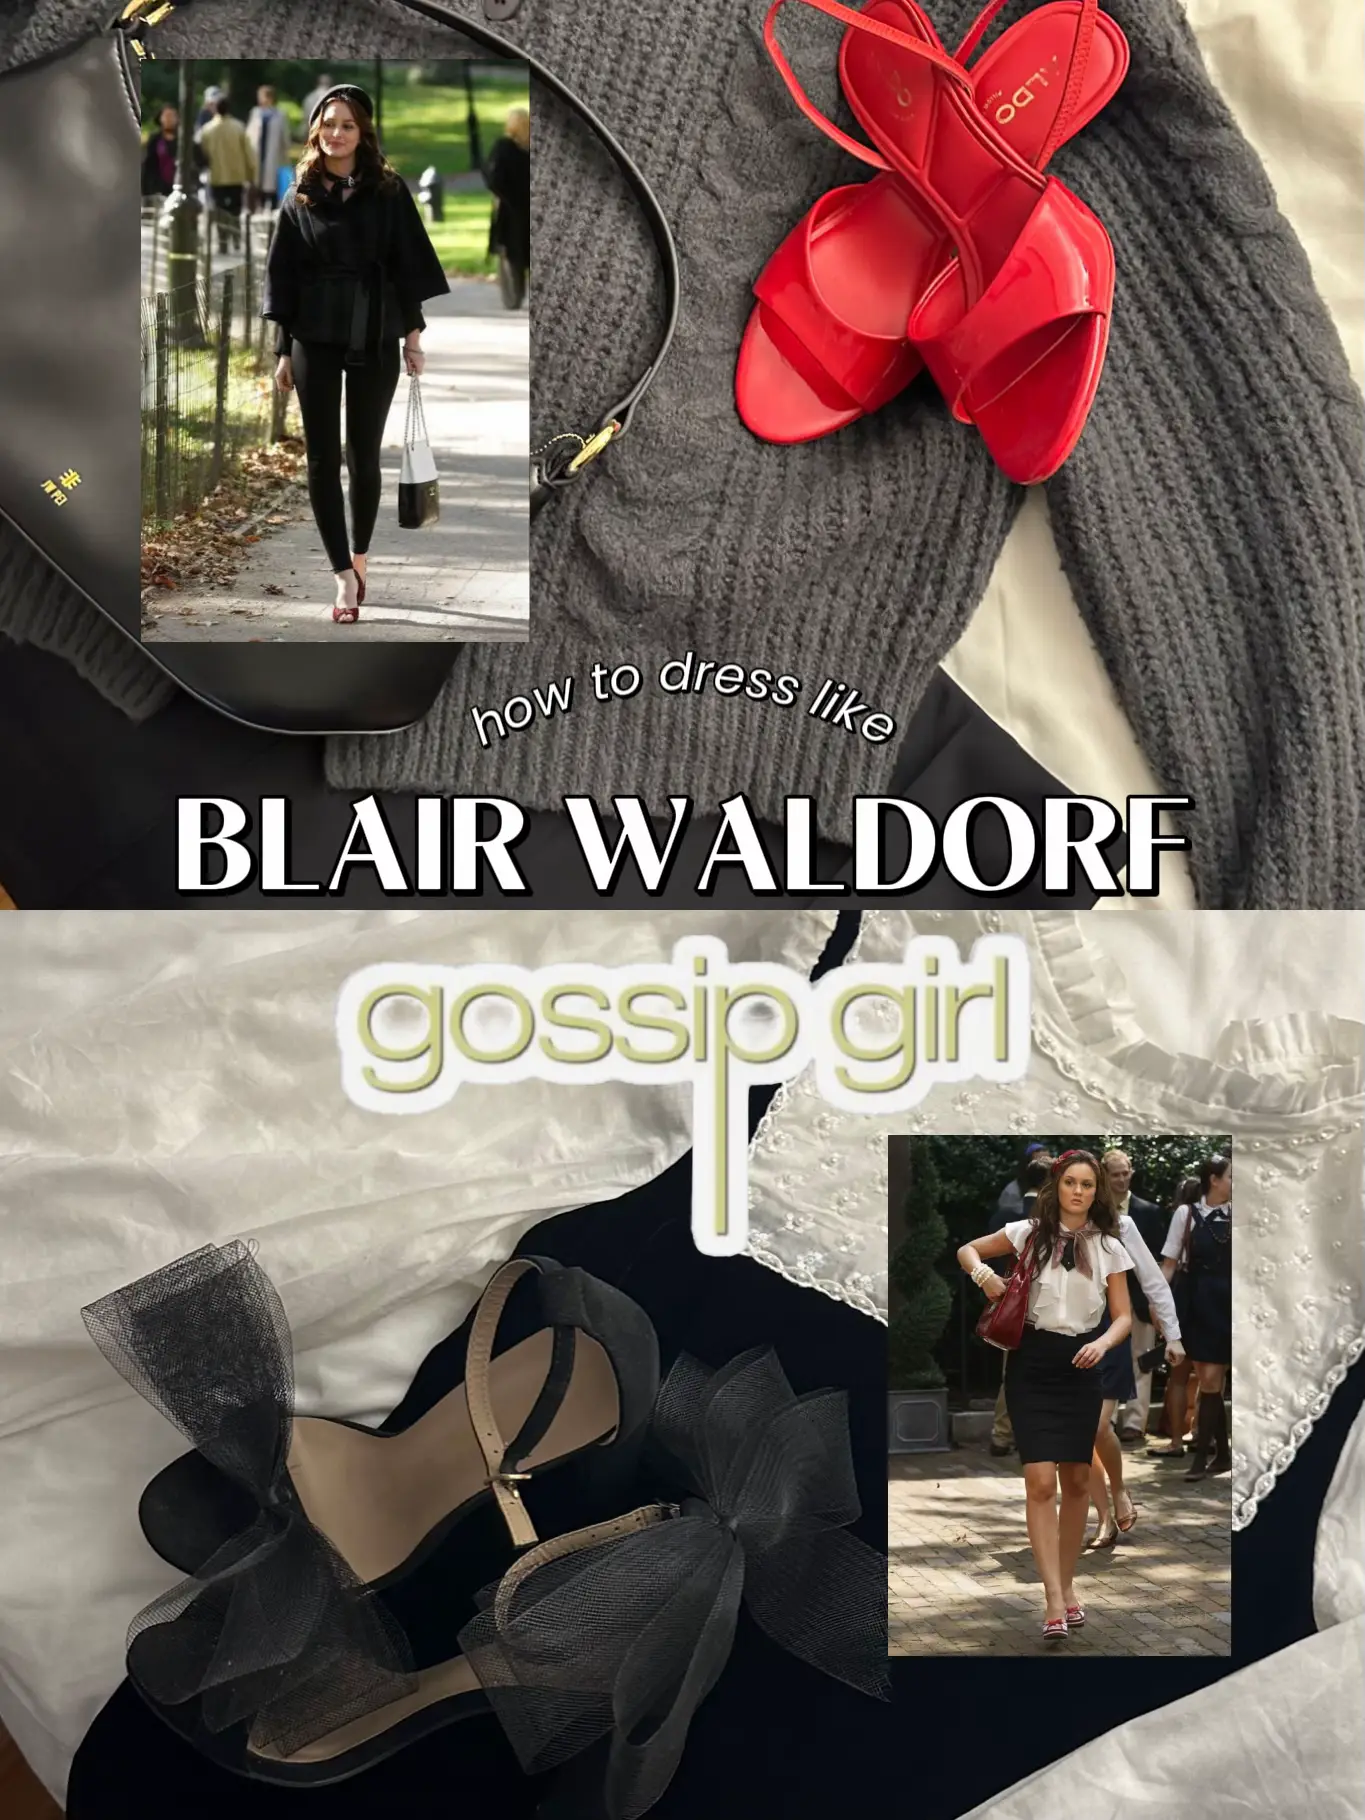 Gossip Girl Character Outfits Ranked by Professional Stylists